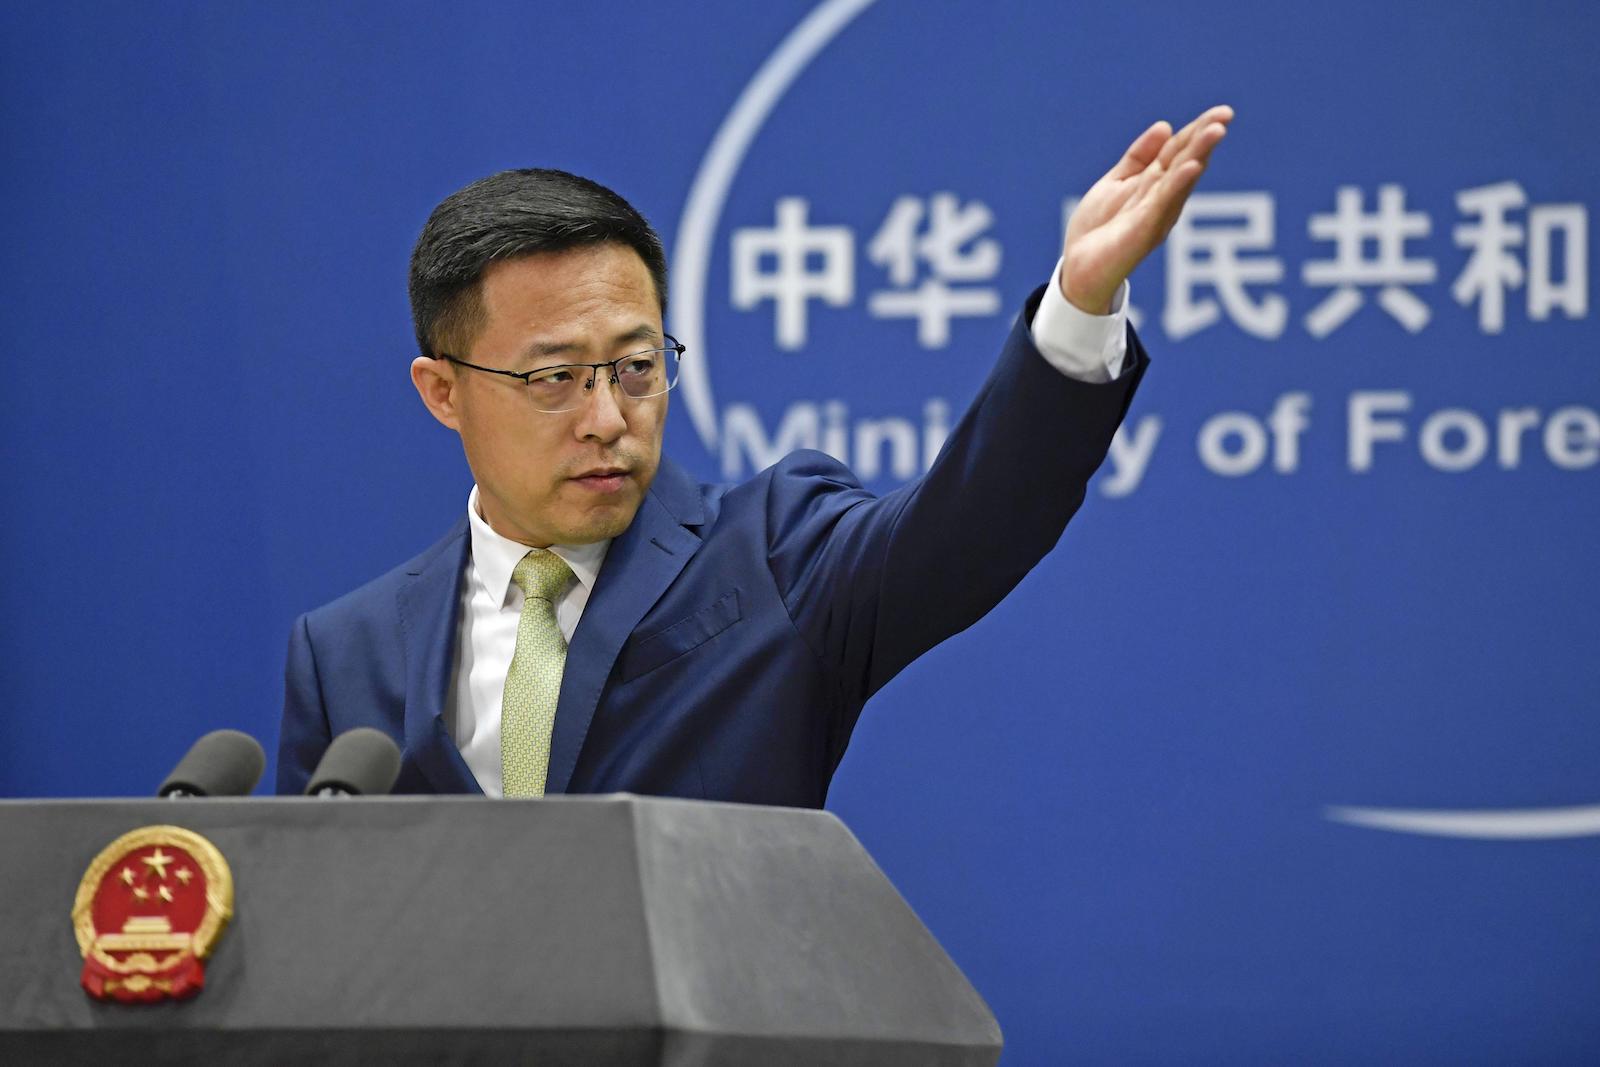 Chinese Foreign Ministry spokesman Zhao Lijian during a press conference in Beijing (Kyodo News via Getty Images)